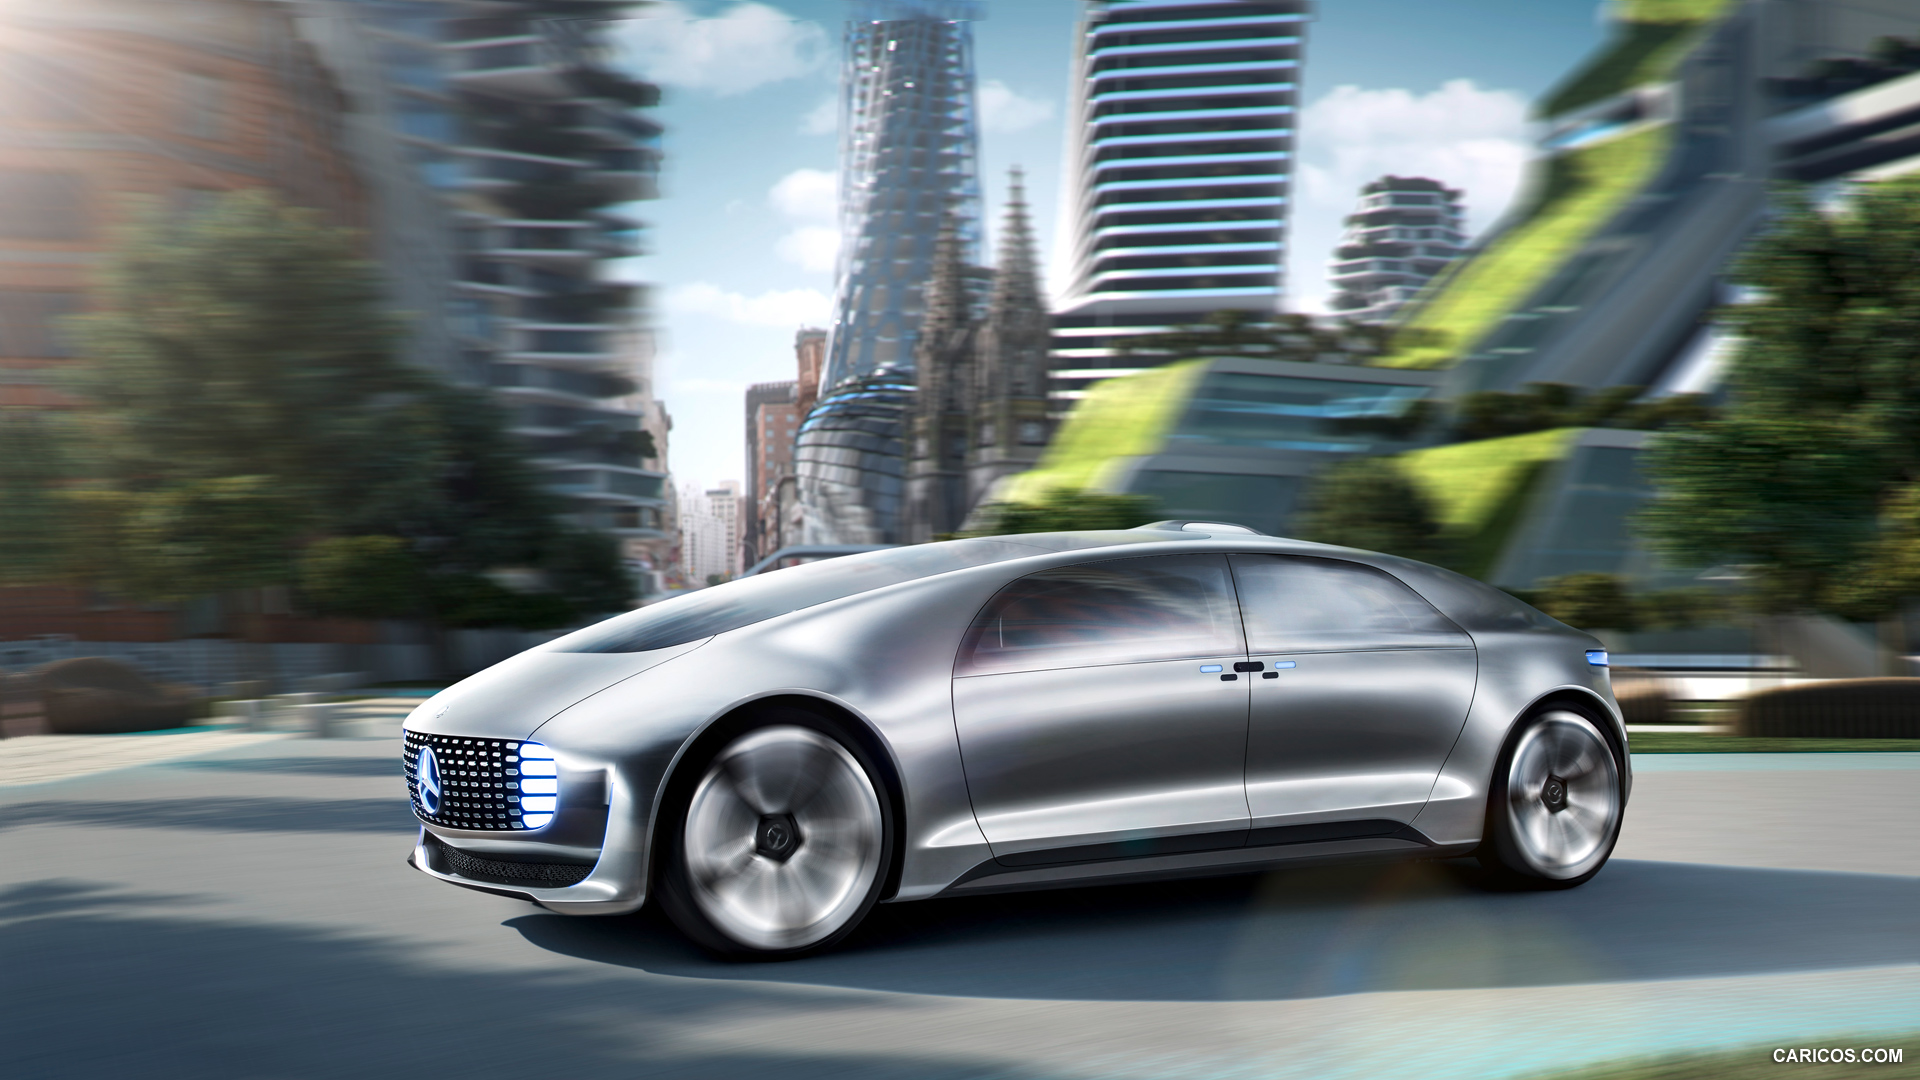 2015 Mercedes-Benz F 015 Luxury in Motion Concept  - Side, #1 of 92